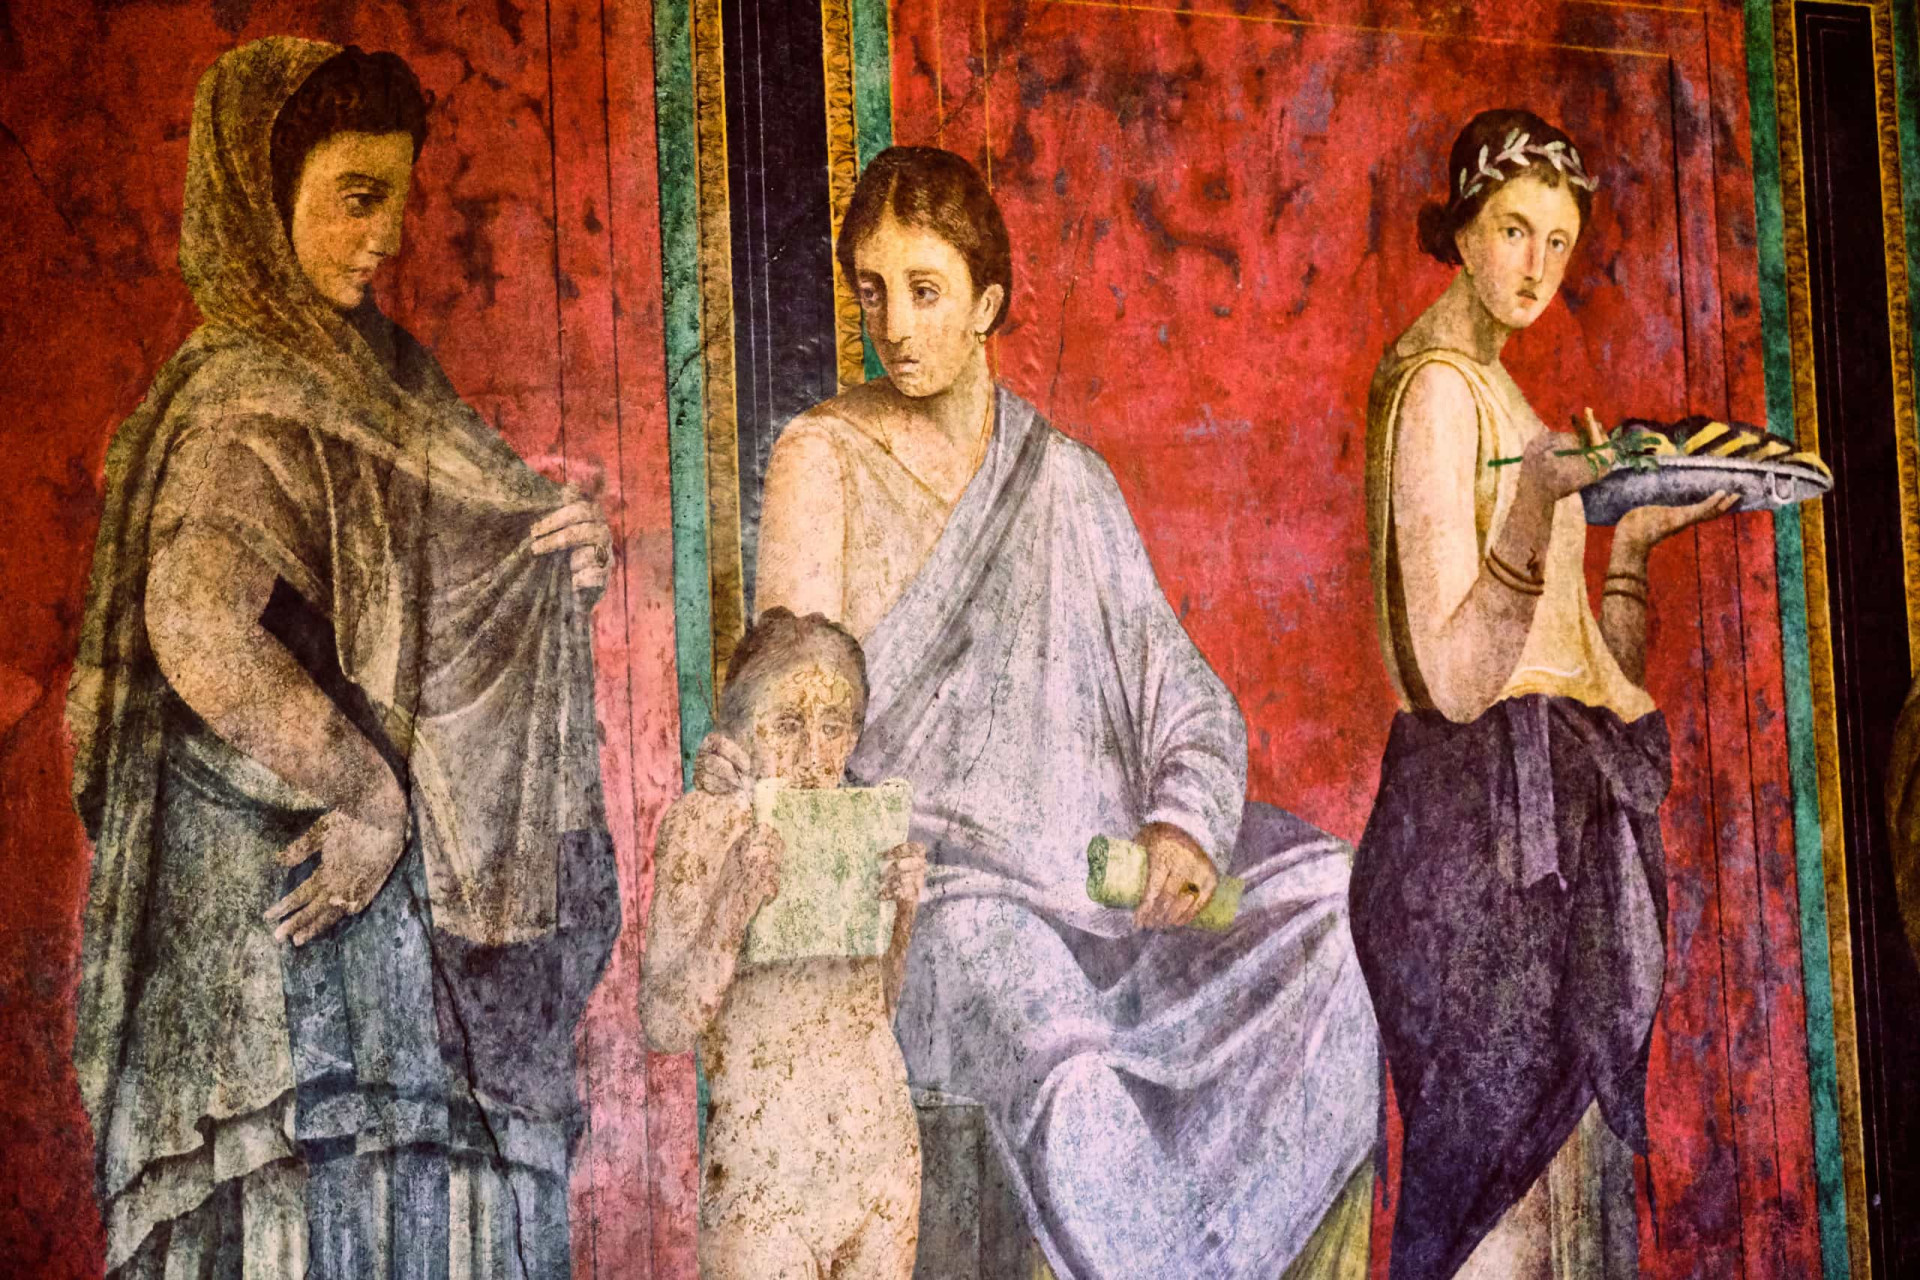 Some of the art in Pompeii, often mural paintings, are incredibly well preserved. Even though restoration does occur in Pompeii, the damage to the murals is remarkably low considering their age. Make sure you check this out for yourself, but don't touch the walls! <p><a href="https://www.msn.com/en-us/community/channel/vid-7xx8mnucu55yw63we9va2gwr7uihbxwc68fxqp25x6tg4ftibpra?cvid=94631541bc0f4f89bfd59158d696ad7e">Follow us and access great exclusive content every day</a></p>